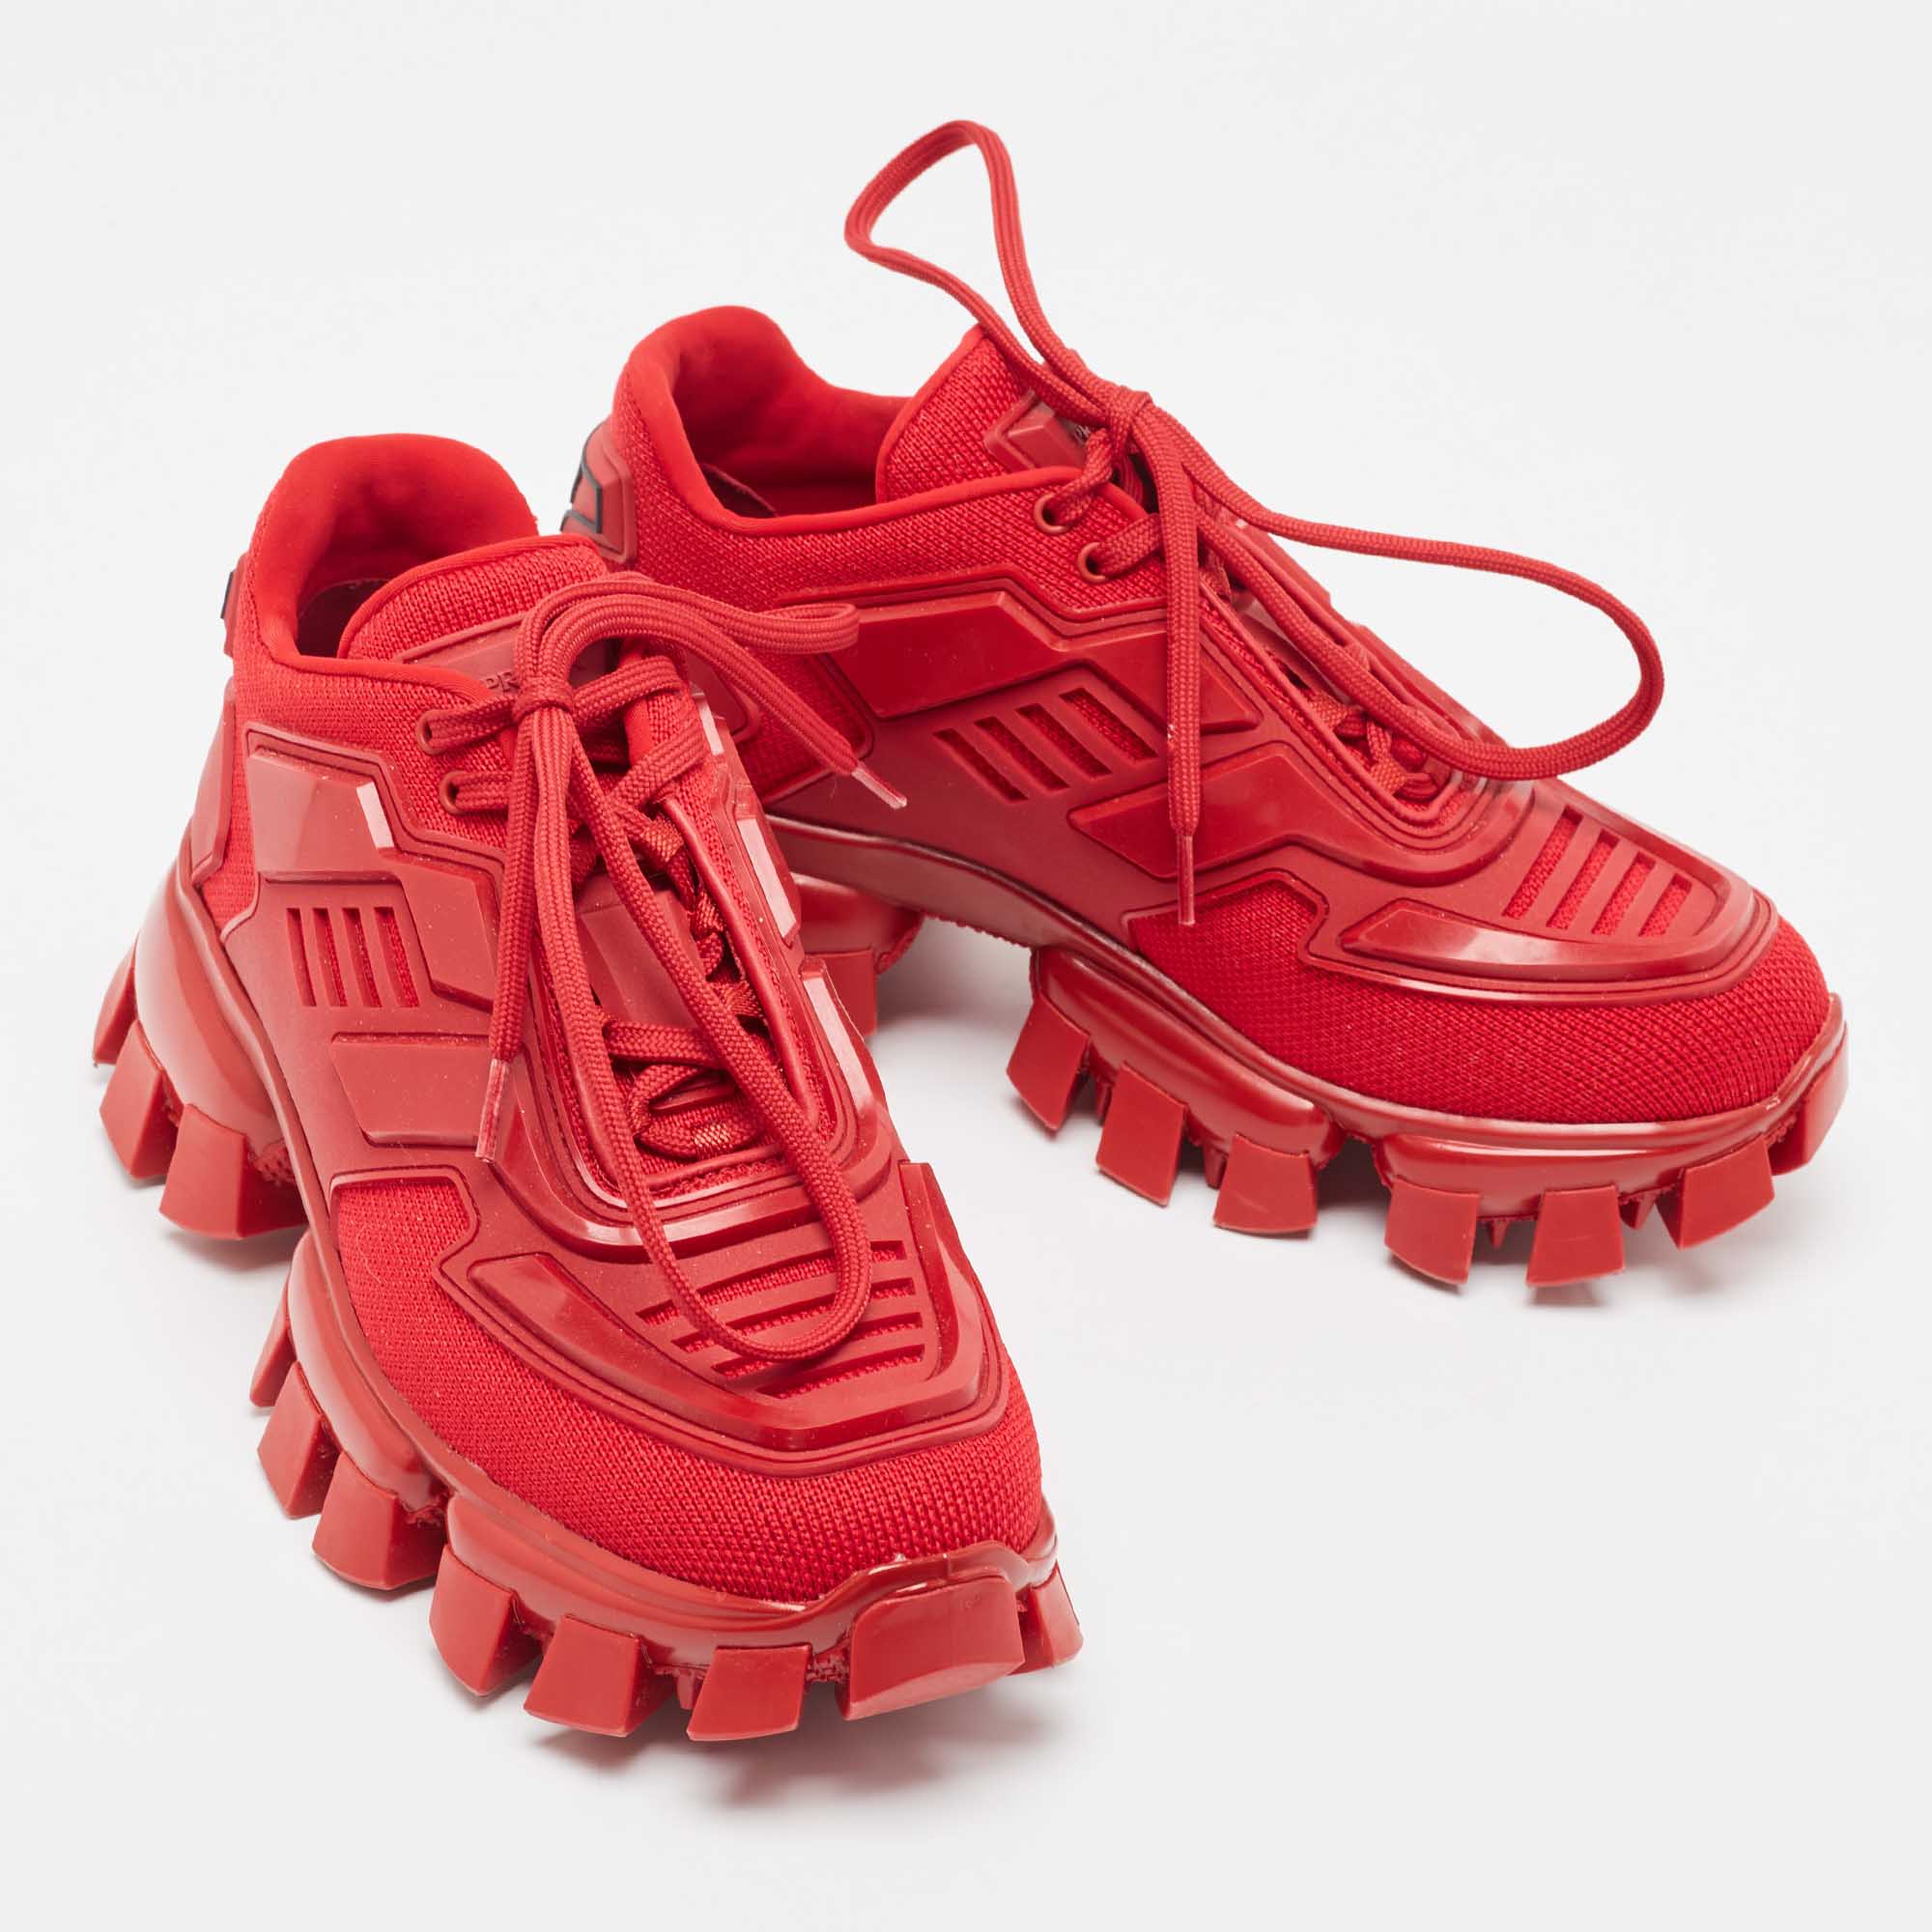 Prada Red Knit Fabric And Rubber Cloudbust Thunder Sneakers Size 37